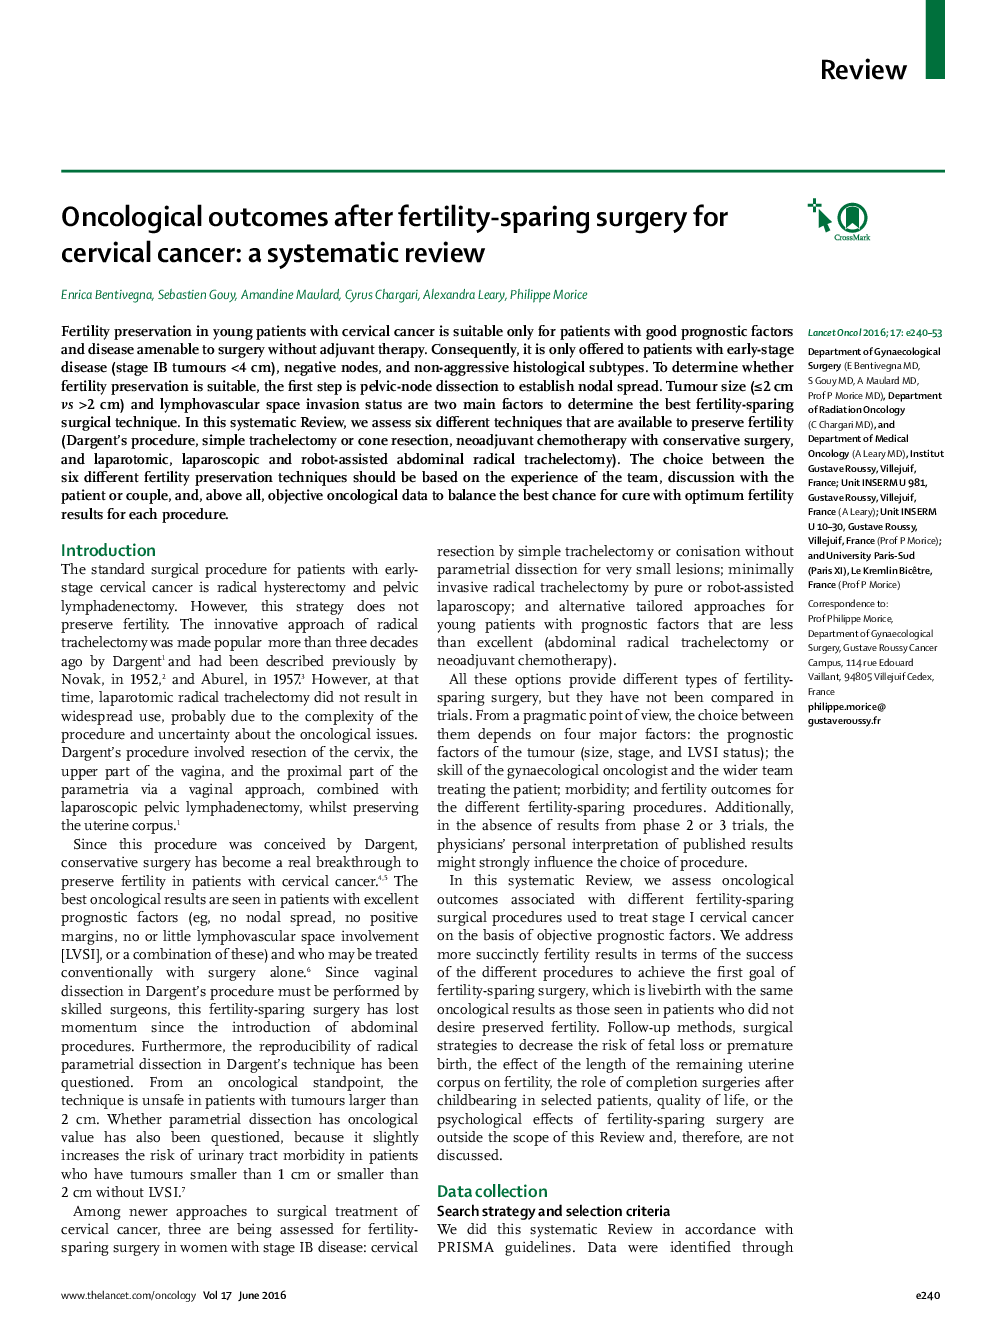 Oncological outcomes after fertility-sparing surgery for cervical cancer: a systematic review